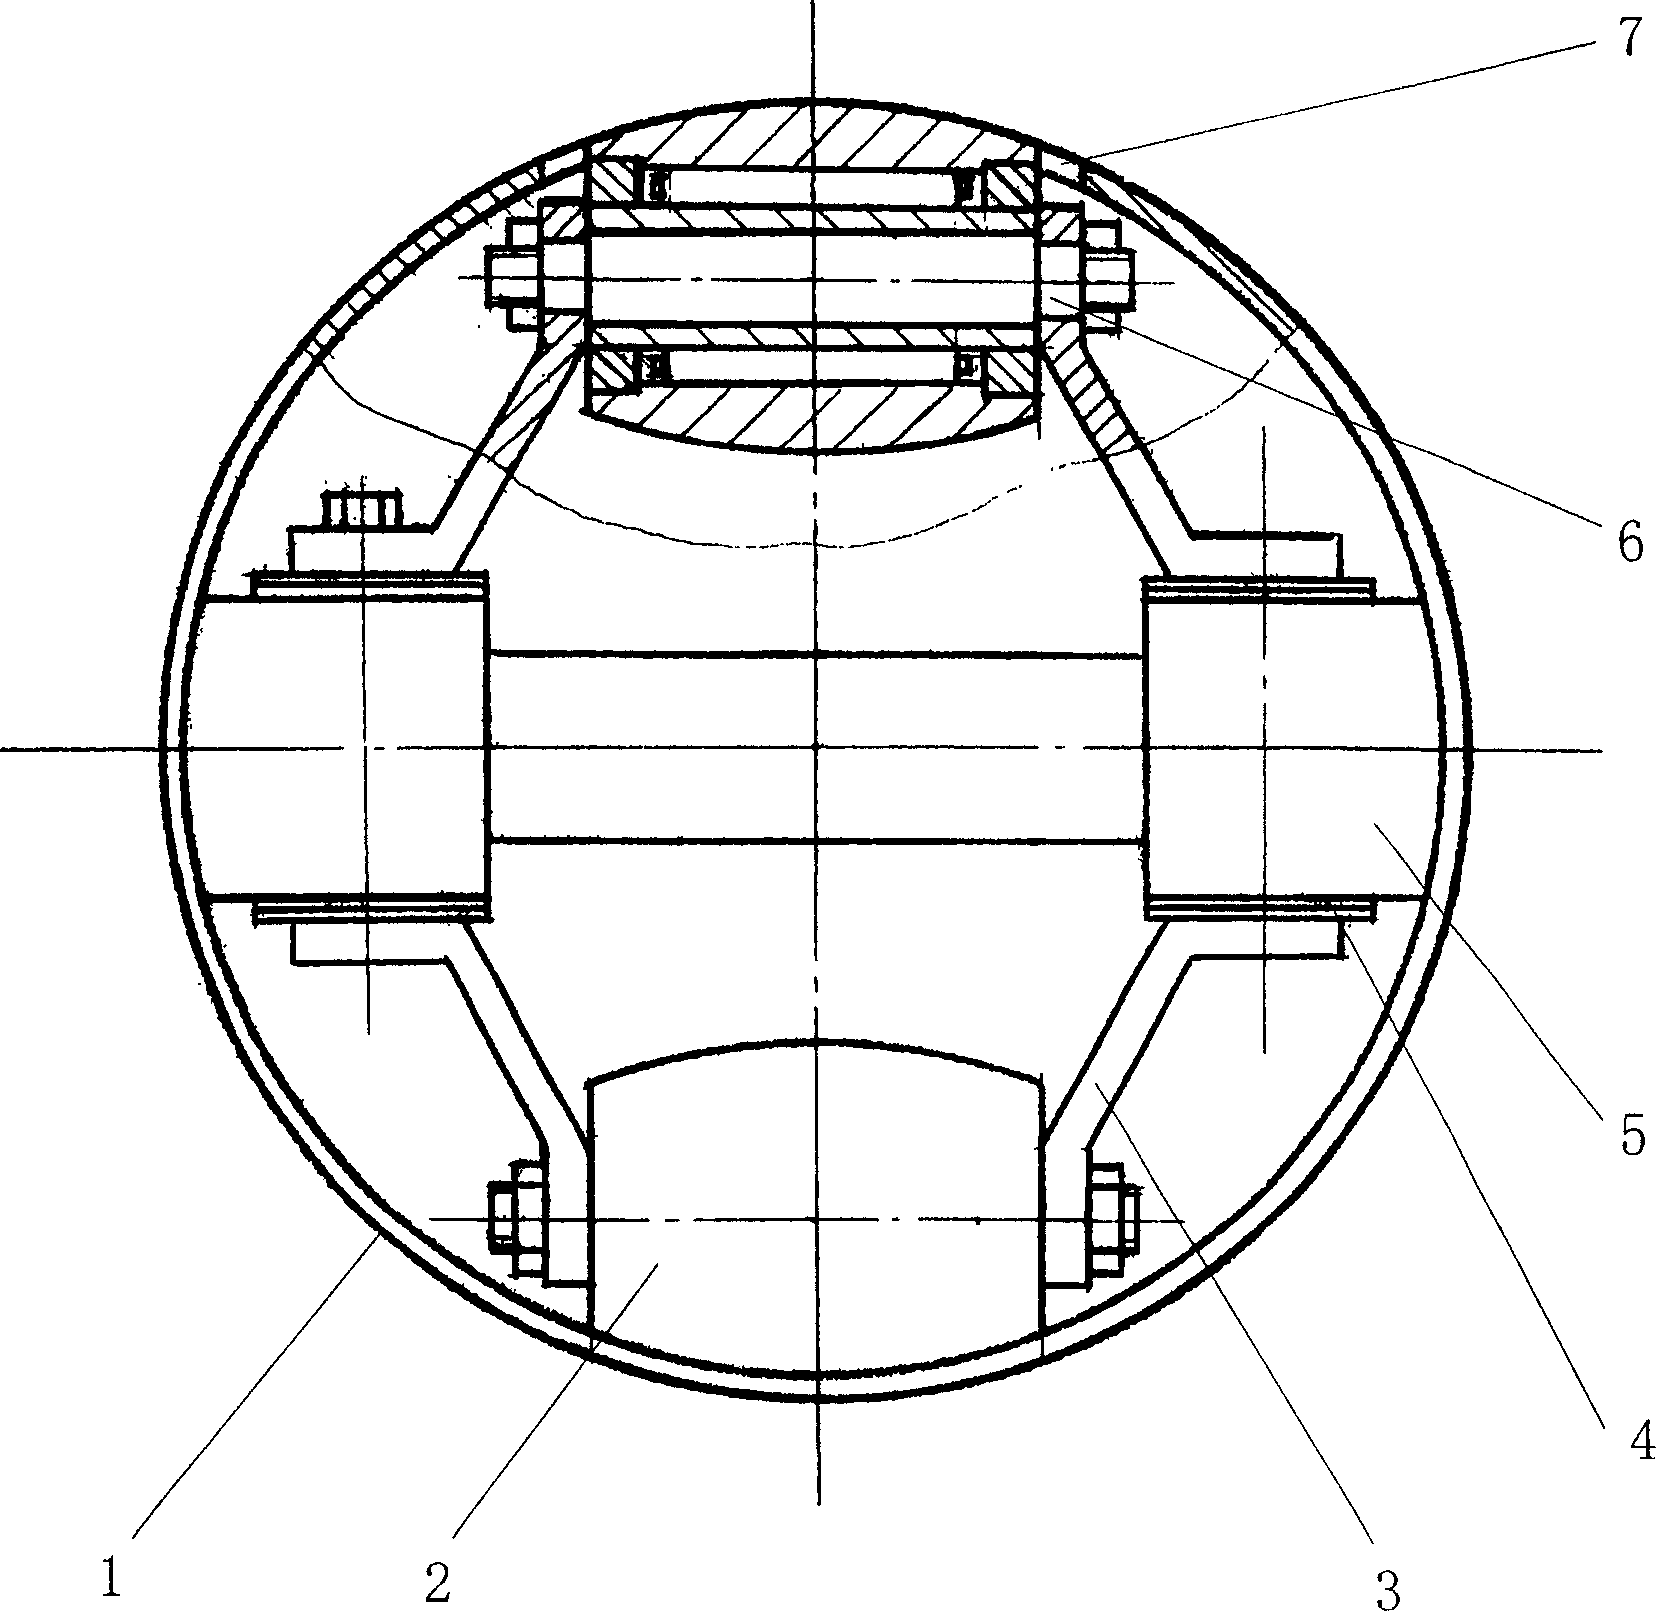 Curved surface rolling bearing type piston for internal combustion engine